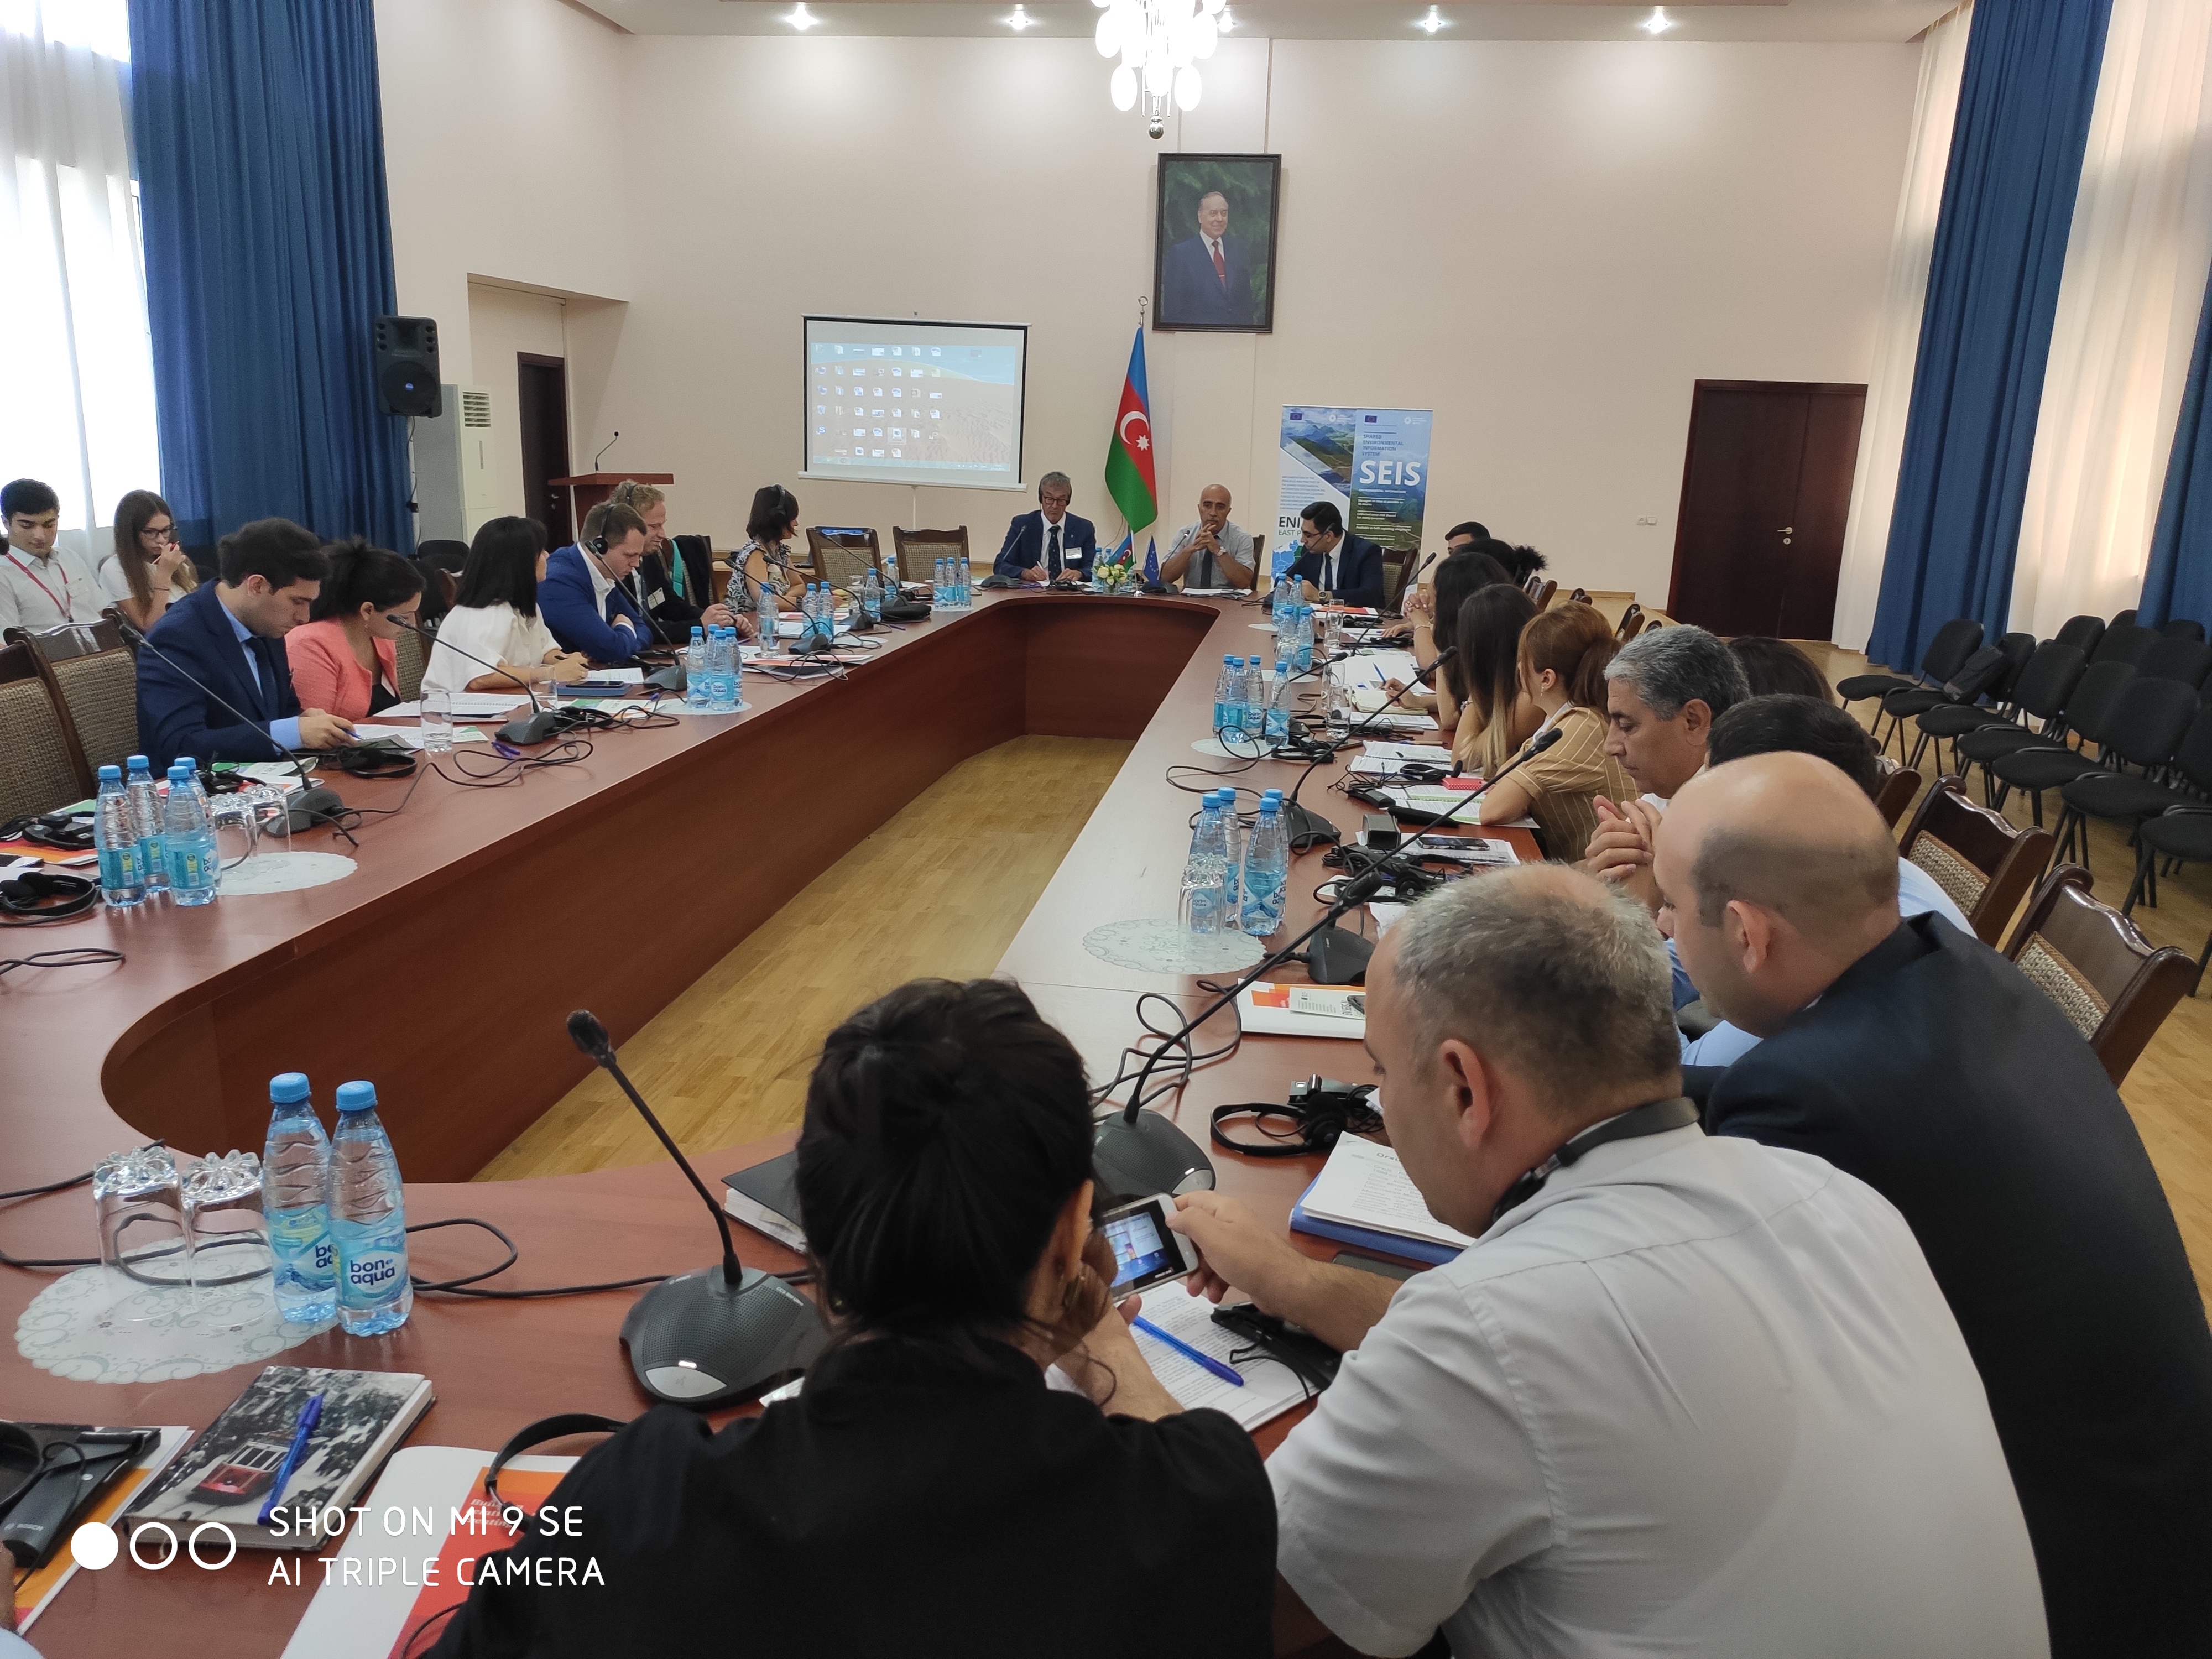 27 August 2019 | Round table on open data and e-governance for the environment in Azerbaijan